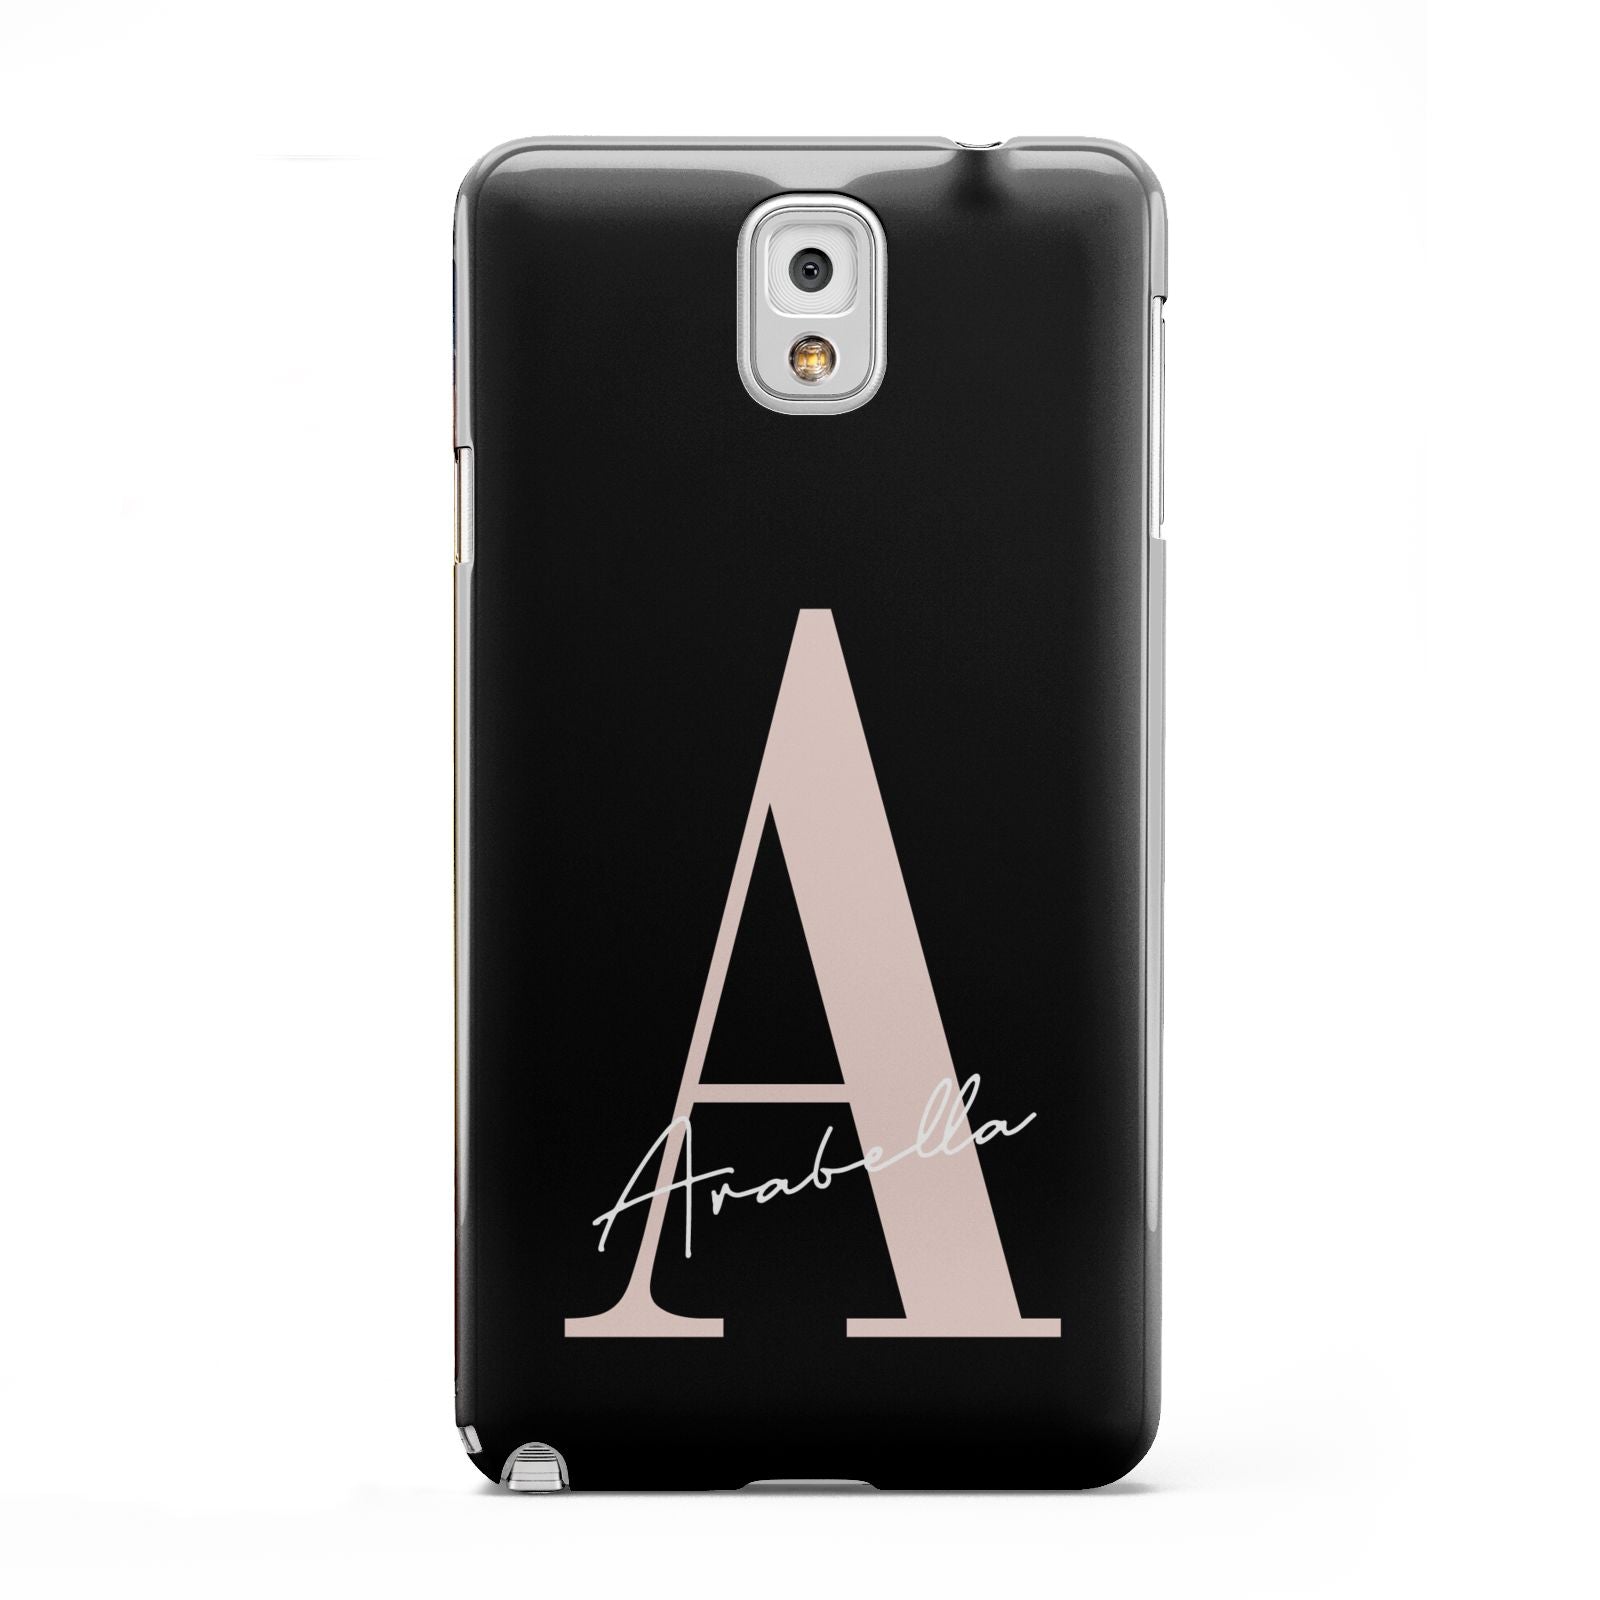 Personalised Black Pink Initial Samsung Galaxy Note 3 Case